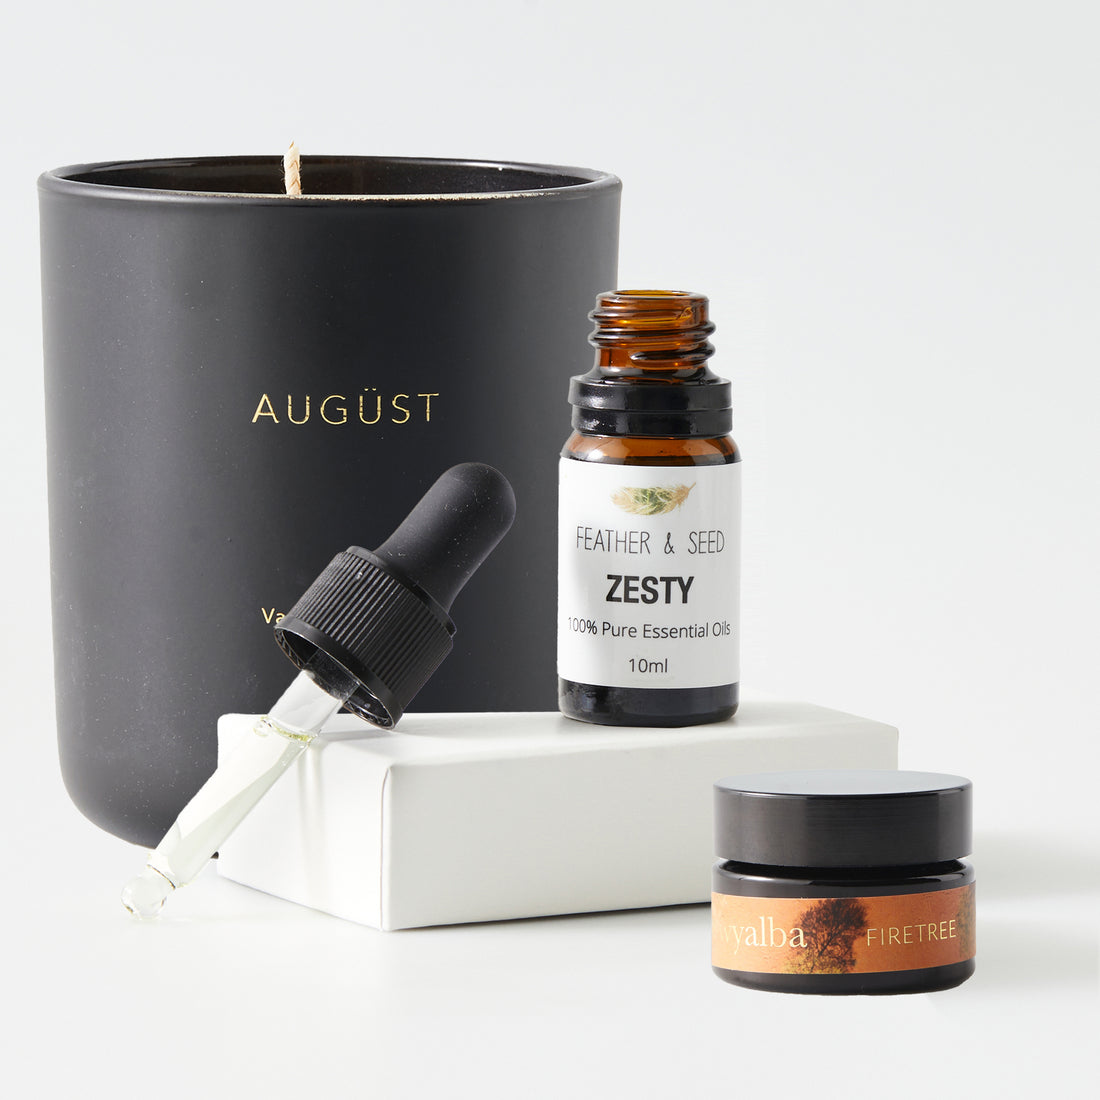 Energising 2 Gift Set is great mix of products to  energise your spirit.  PRODUCTS INCLUDED:  ・Feather & Seed Zesty Essential Oil, 10ml ・Wyalba Firetree Balm, 15gm ・Vanessa Megan August Essential Oil Candle, 300gm